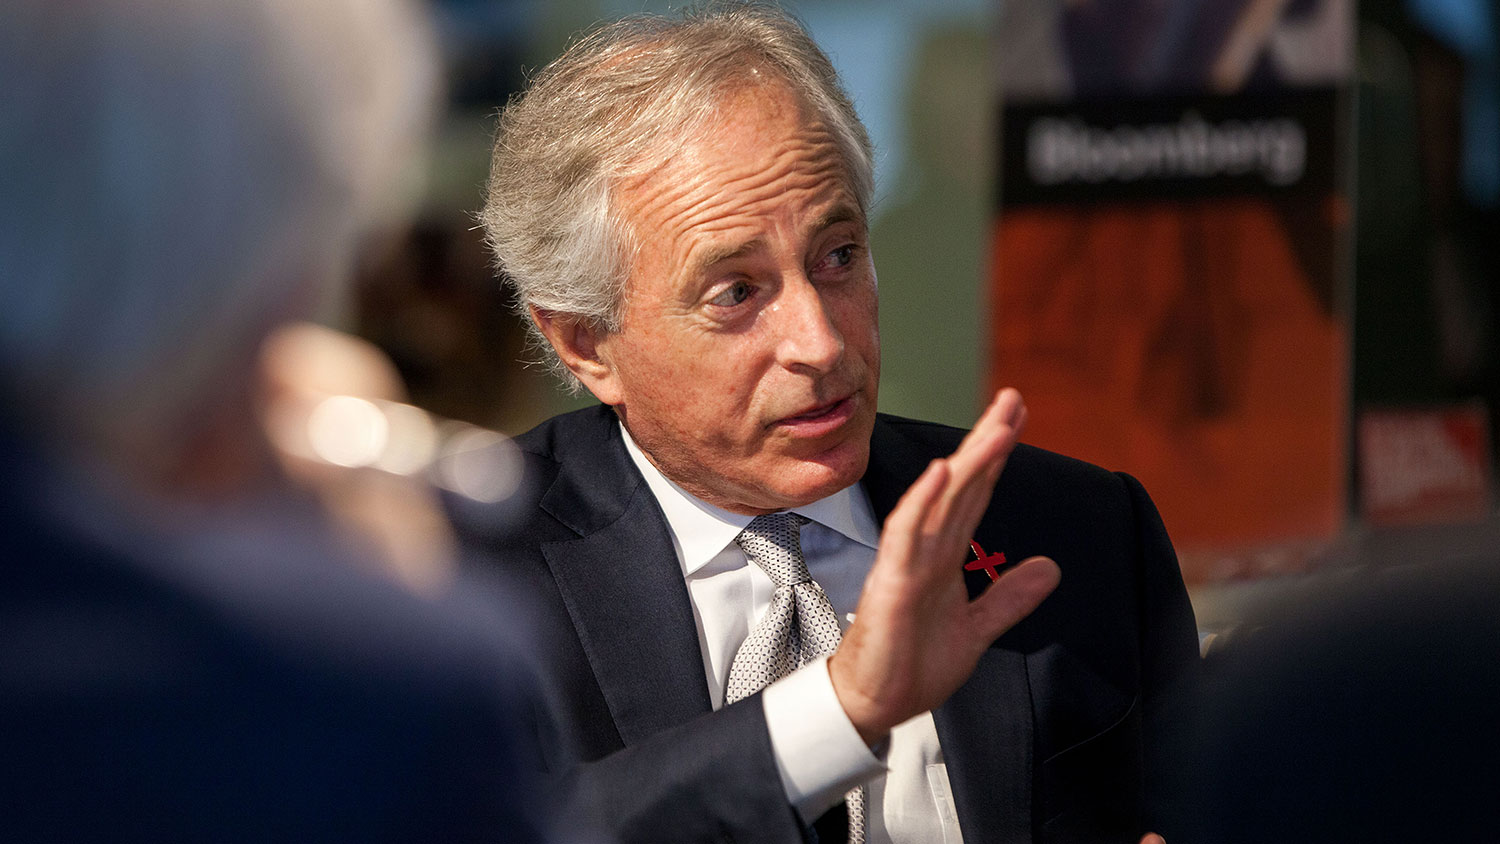 Senator Bob Corker, a Republican from Tennessee, speaks during an interview in Washington, D.C., U.S., on Thursday, Feb. 26, 2015.
